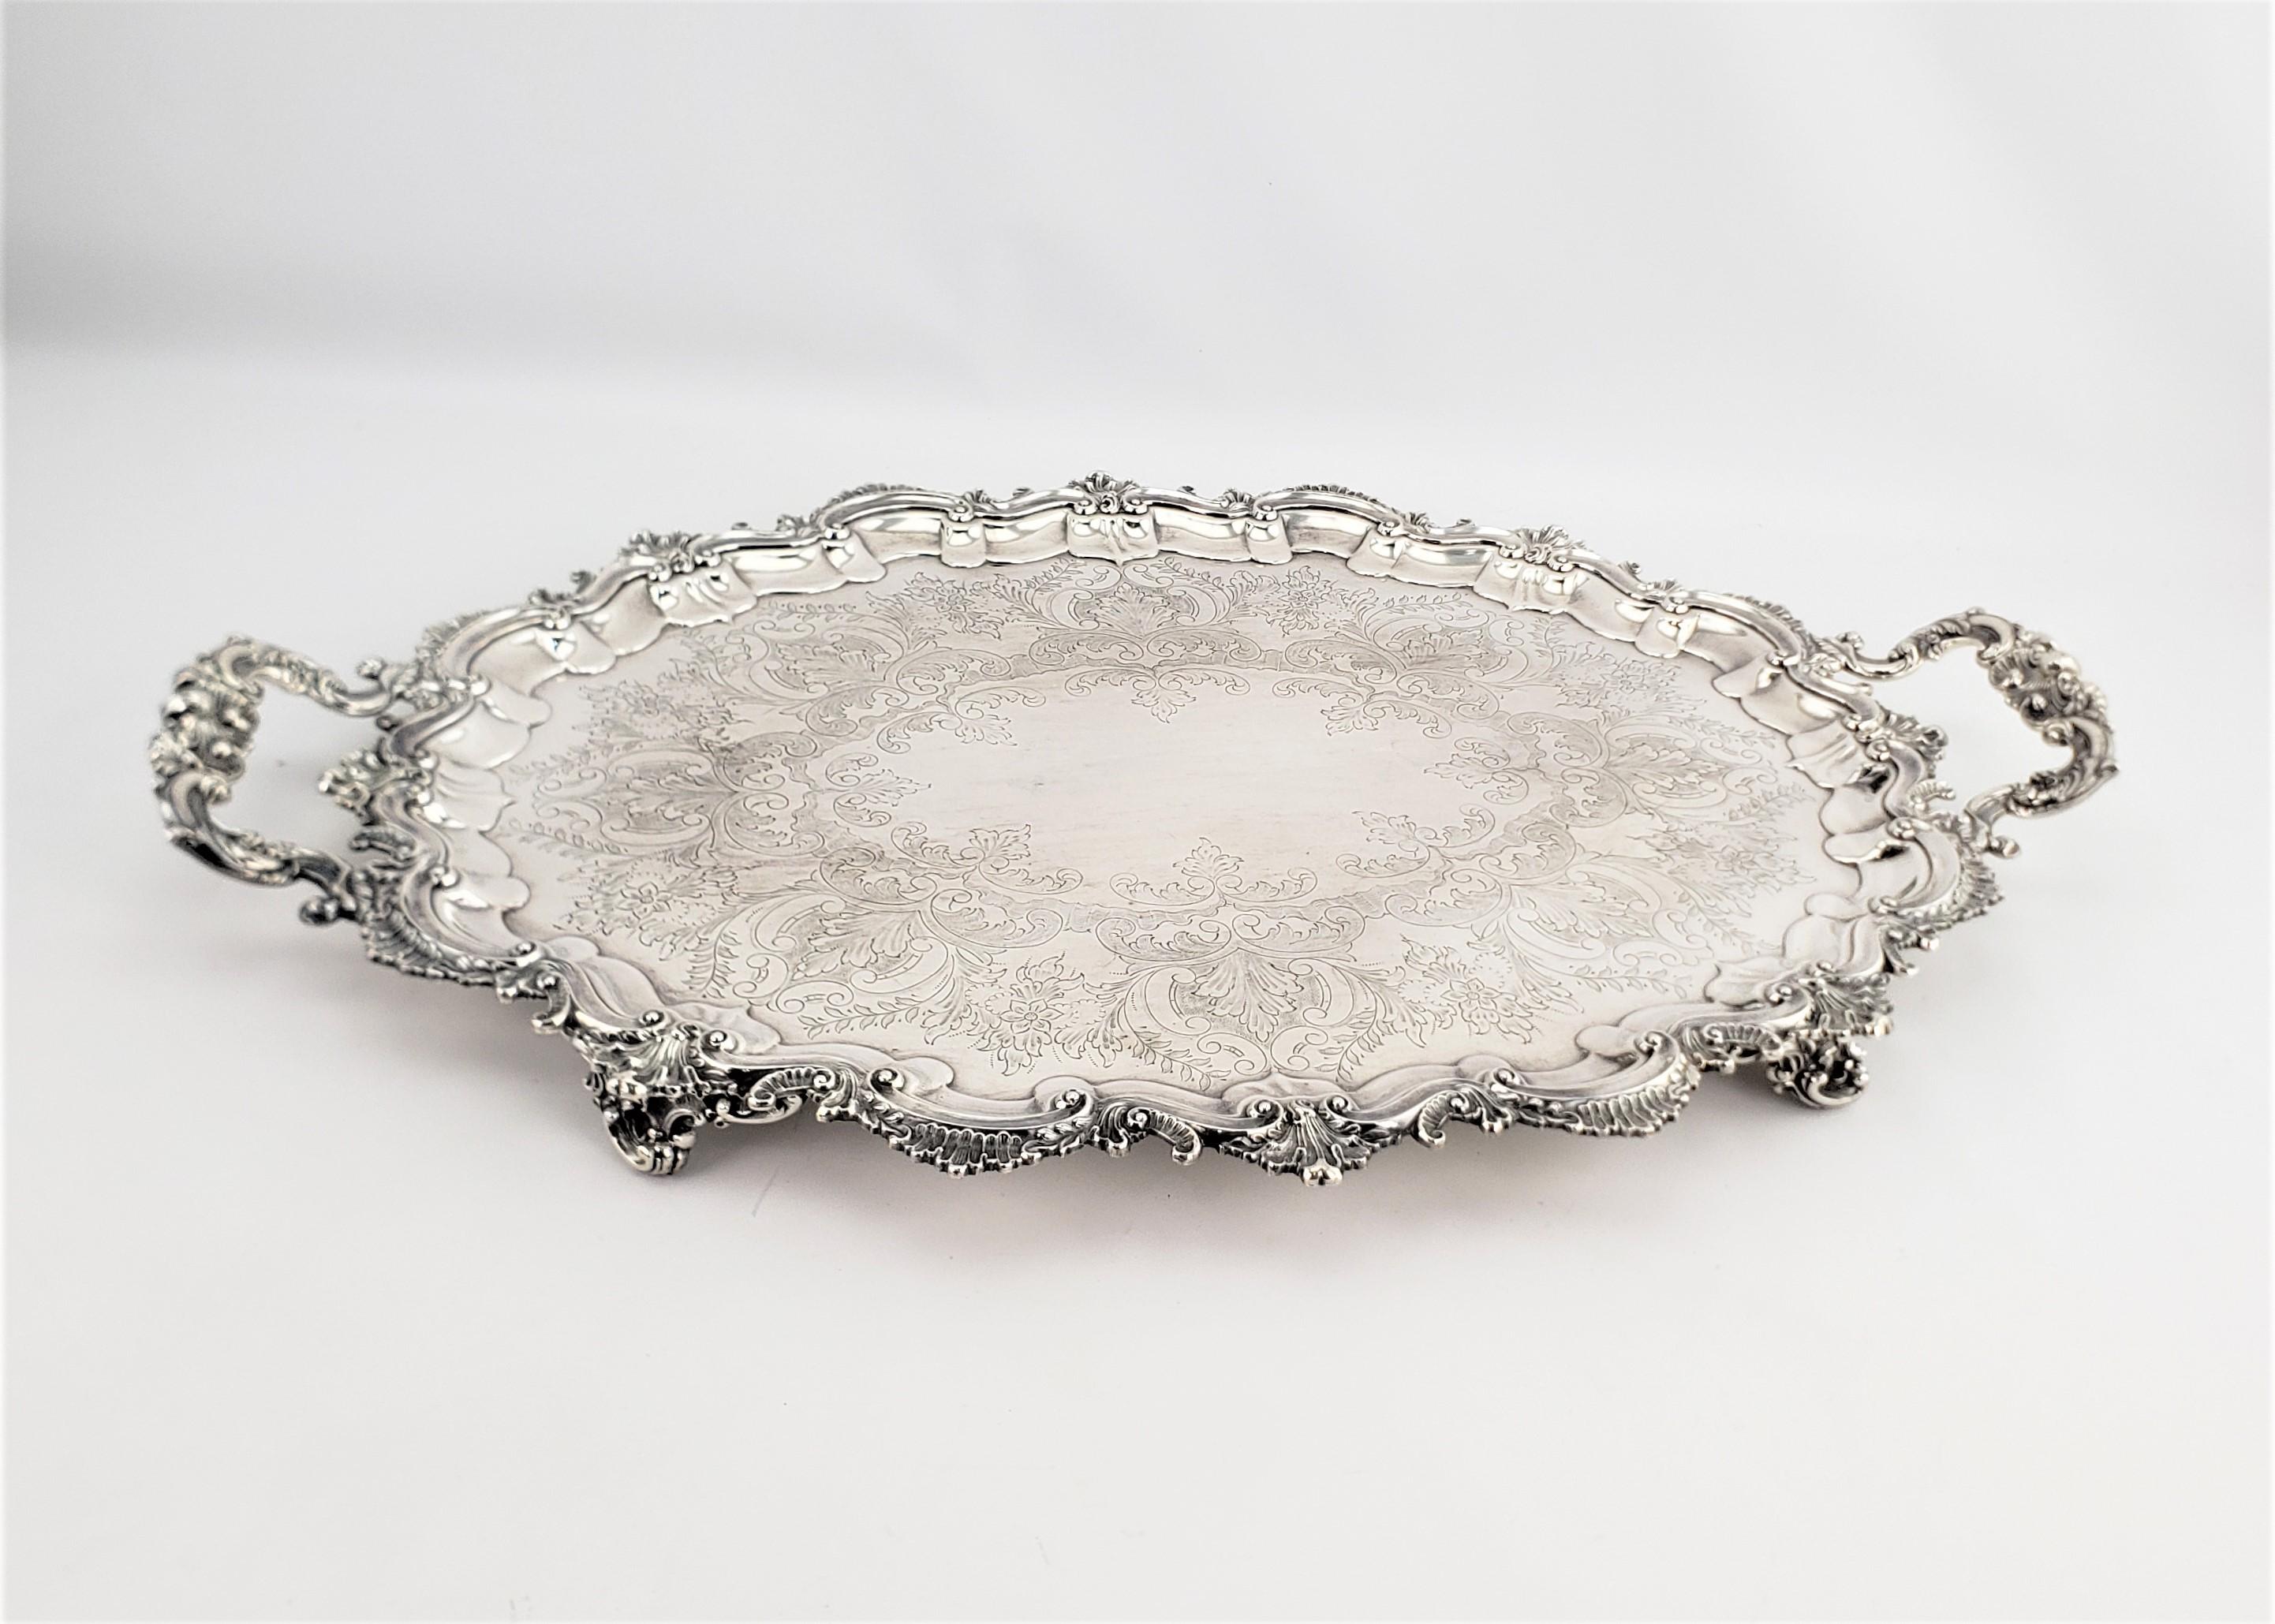 This large footed silver plated serving tray is marked by an unknown maker, and originates from England and dates to approximately 1920 and done in a Victorian style. This large oval serving tray is done with an elaborate floral decoration along the